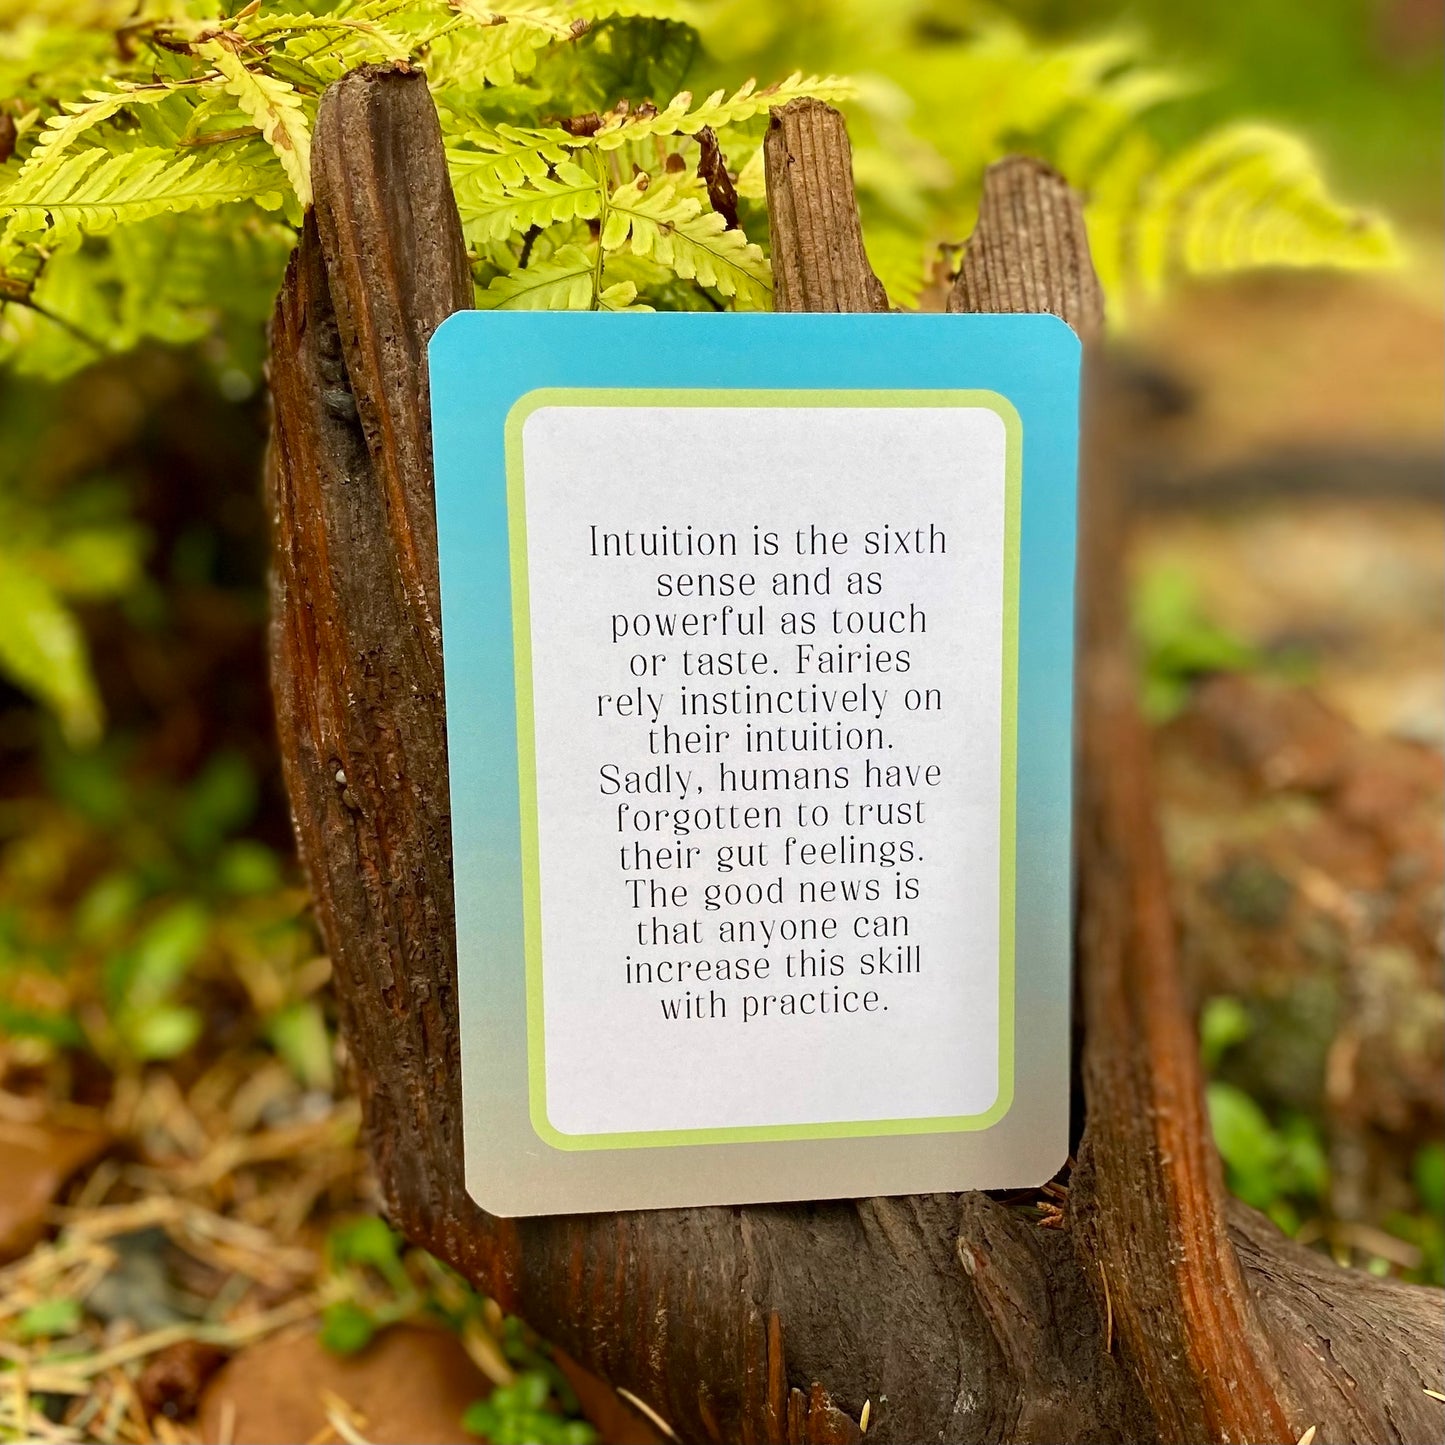 Affirmation Card Deck - How to Live Like a Fairy